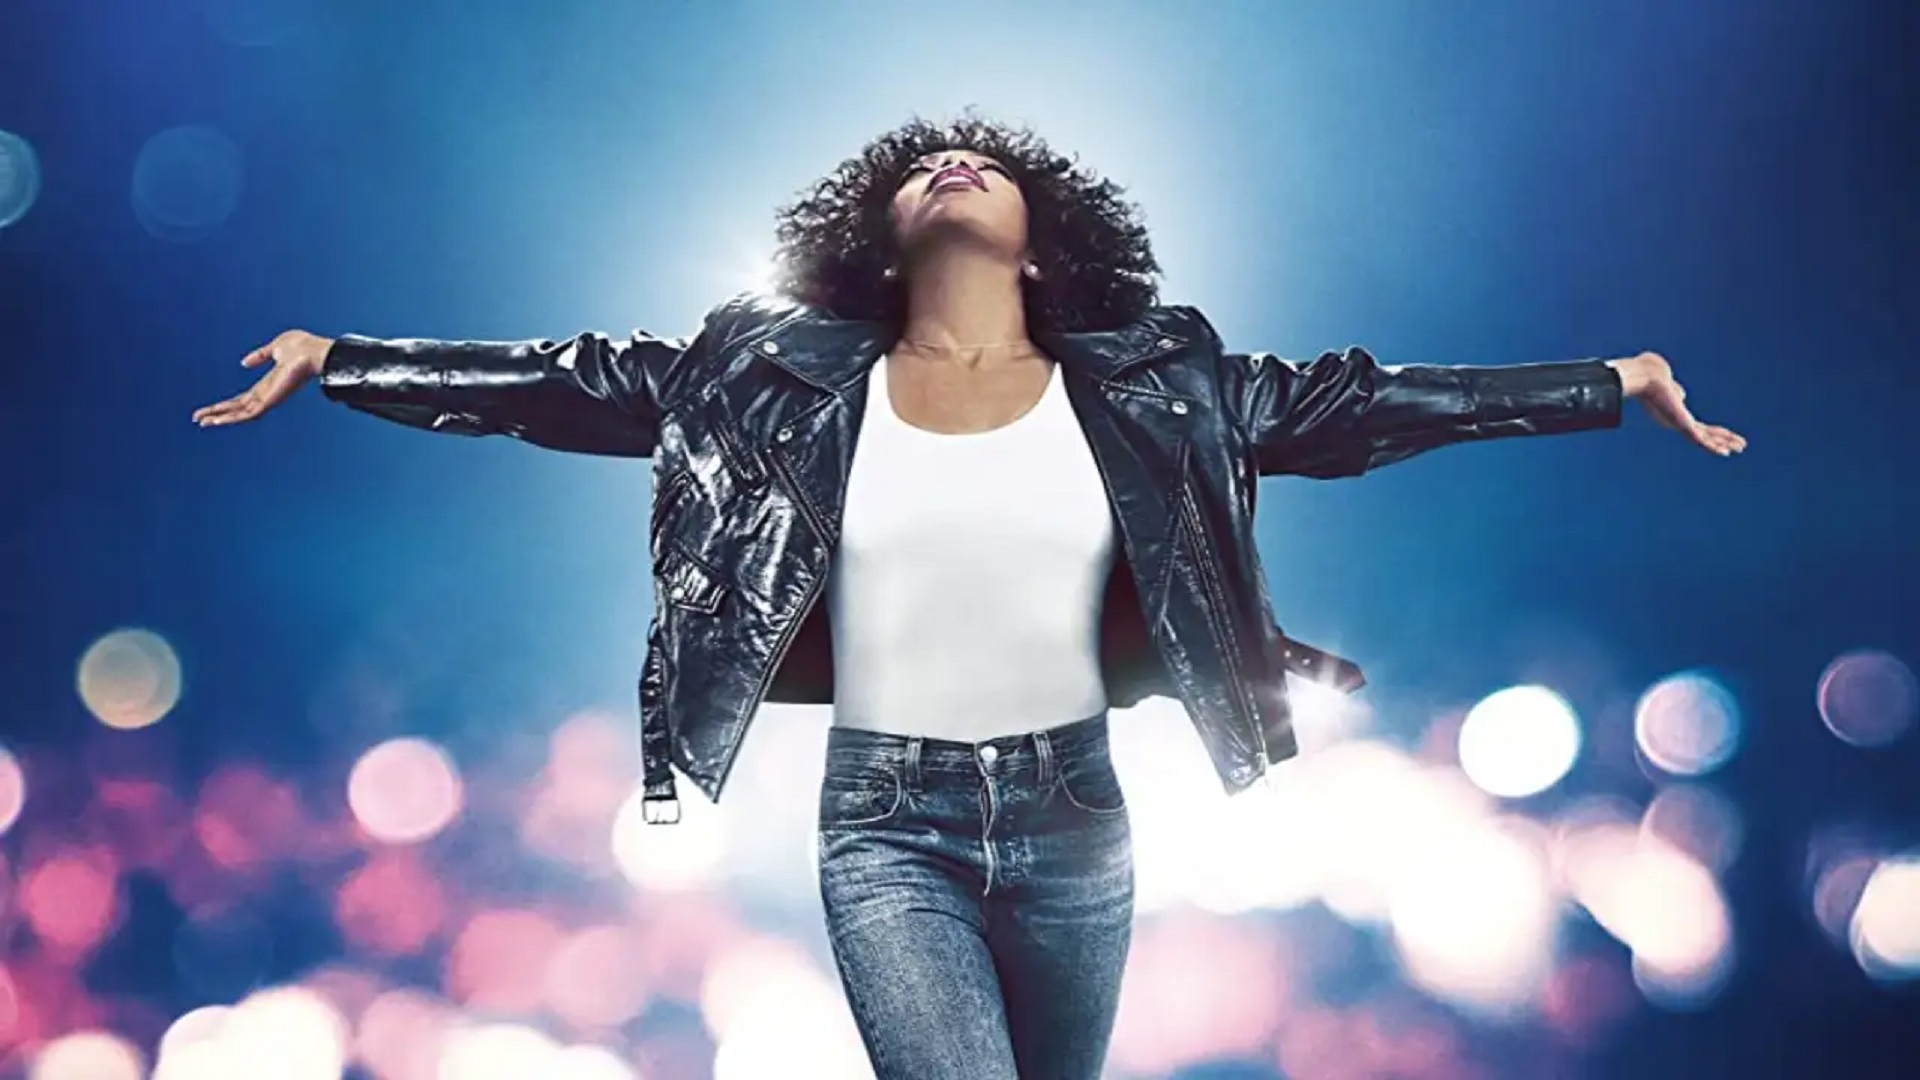 I Wanna Dance With Somebody Review: Whitney Houston Biopic Soars & Hits All The Right Notes